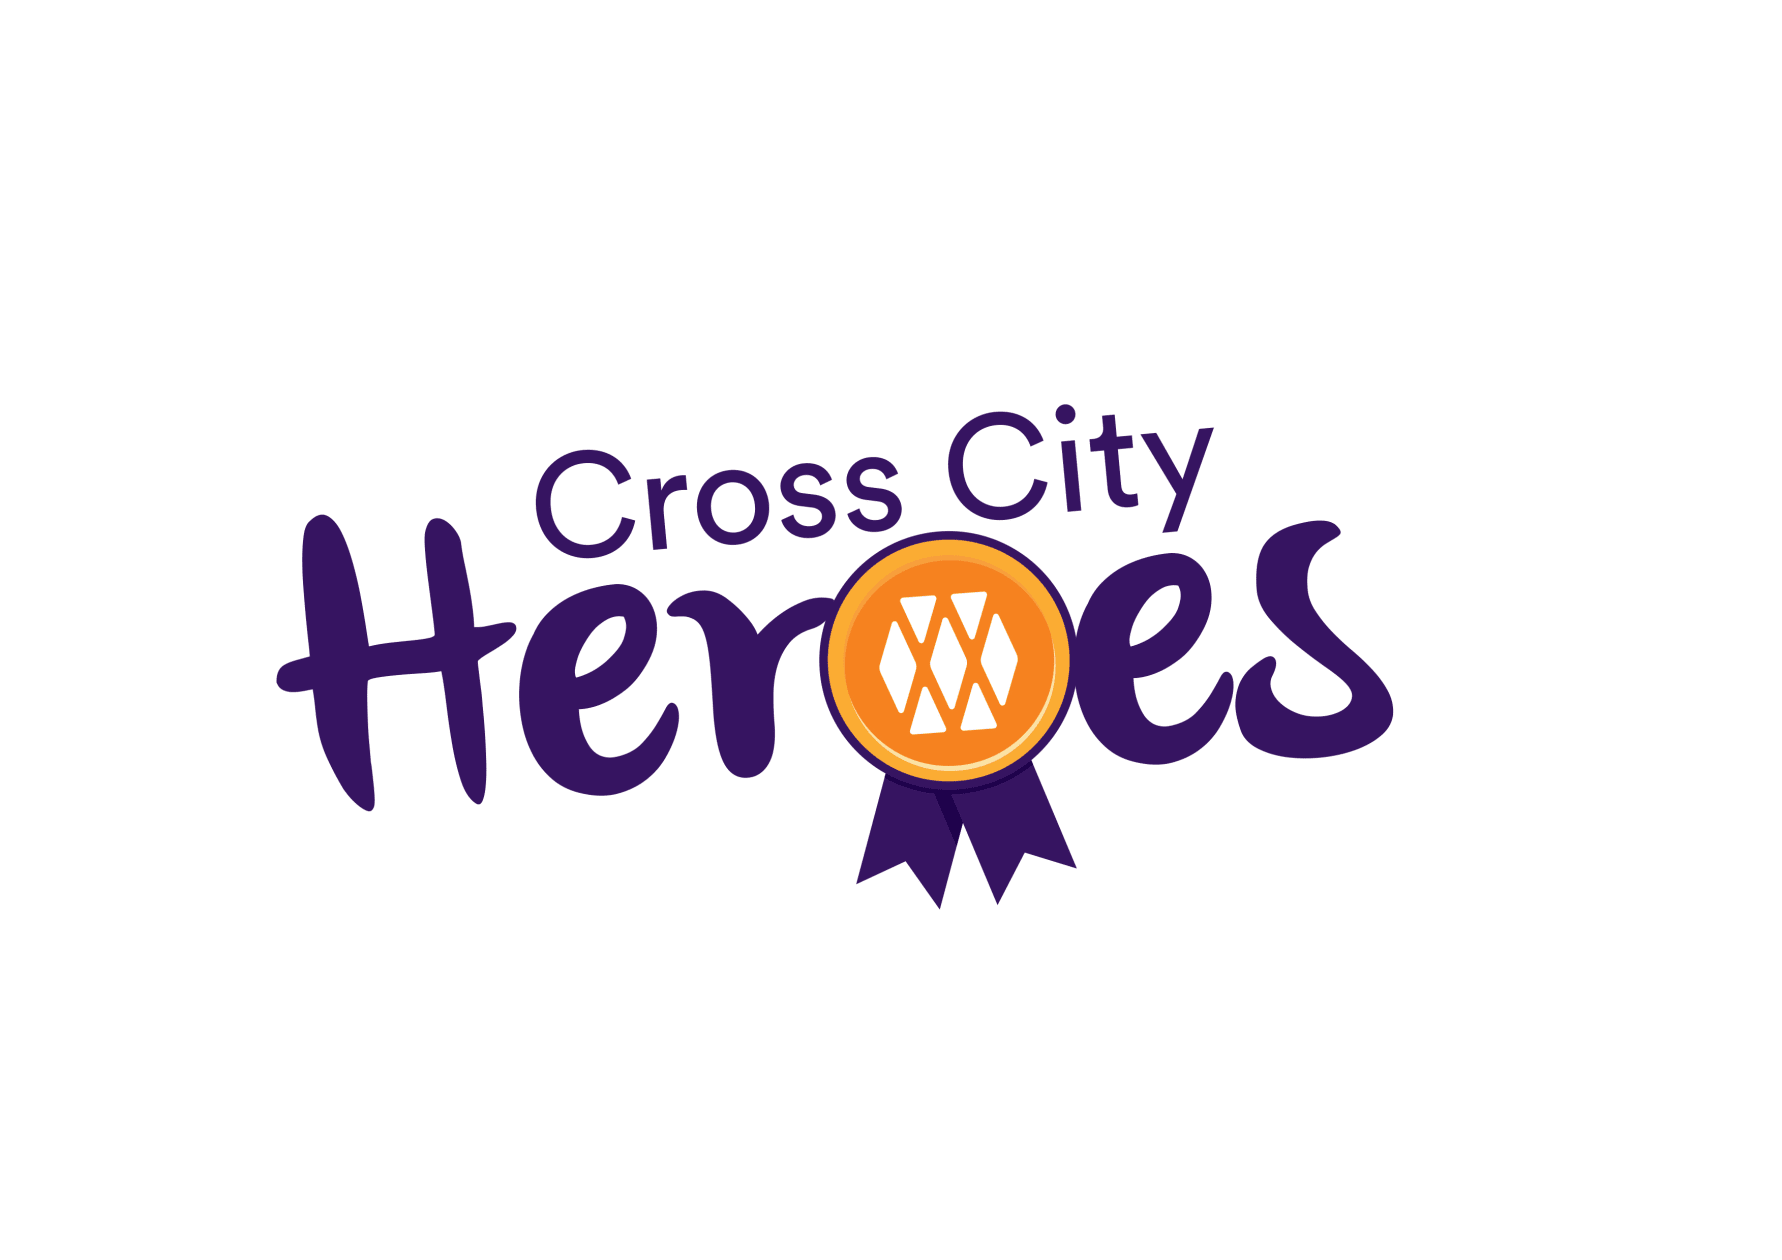 A final call – who are the region’s Cross City Heroes?